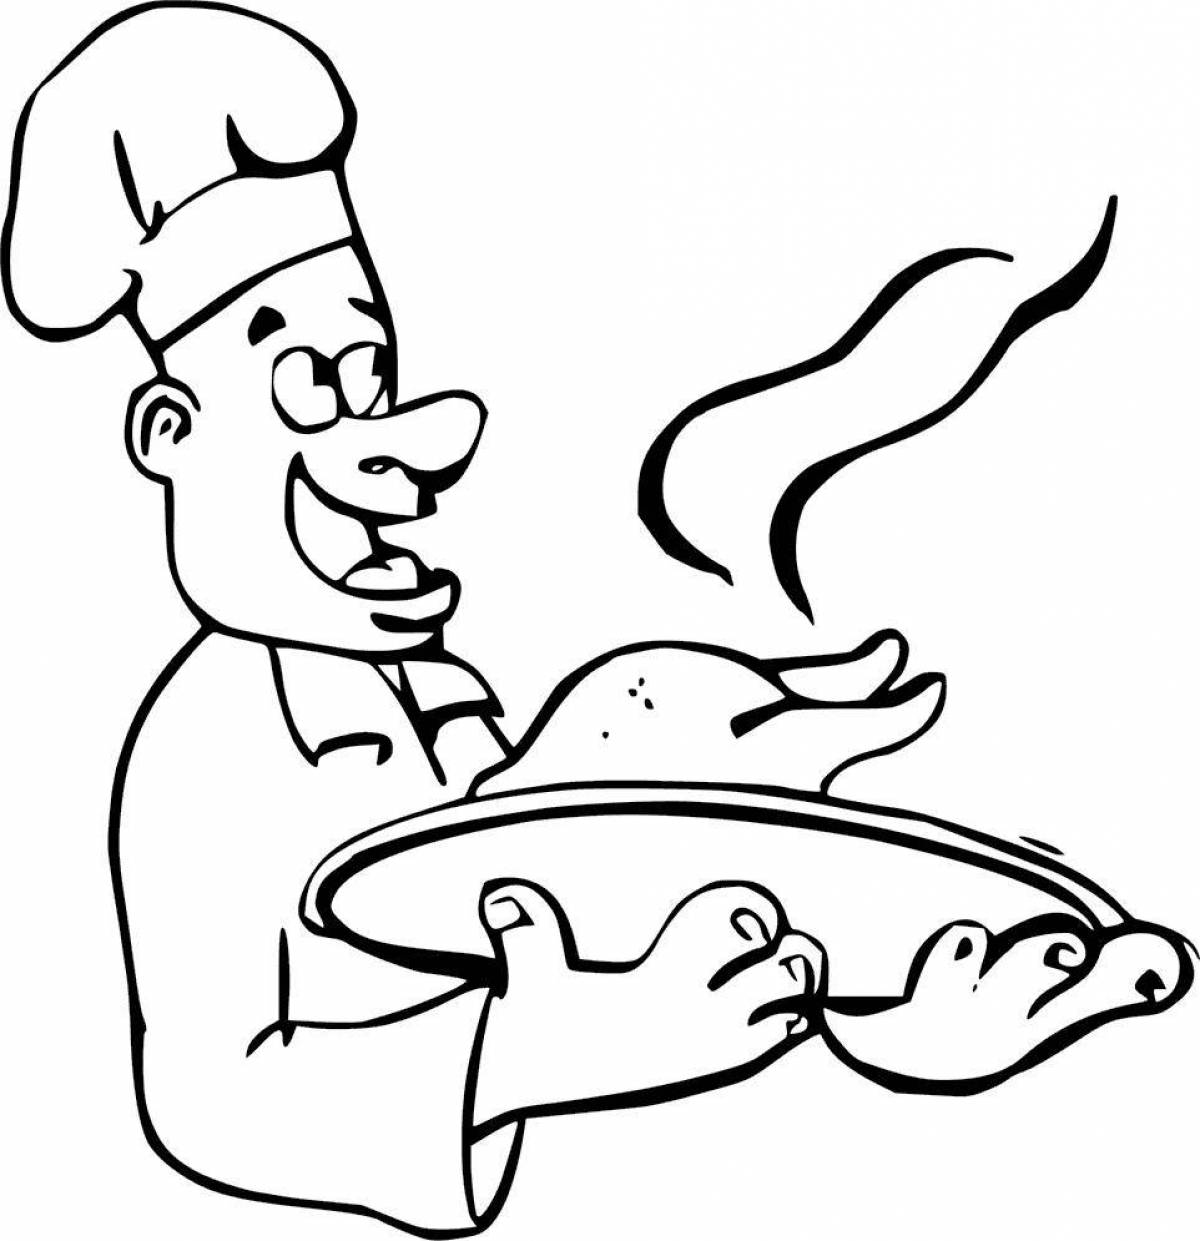 Animated chef coloring book